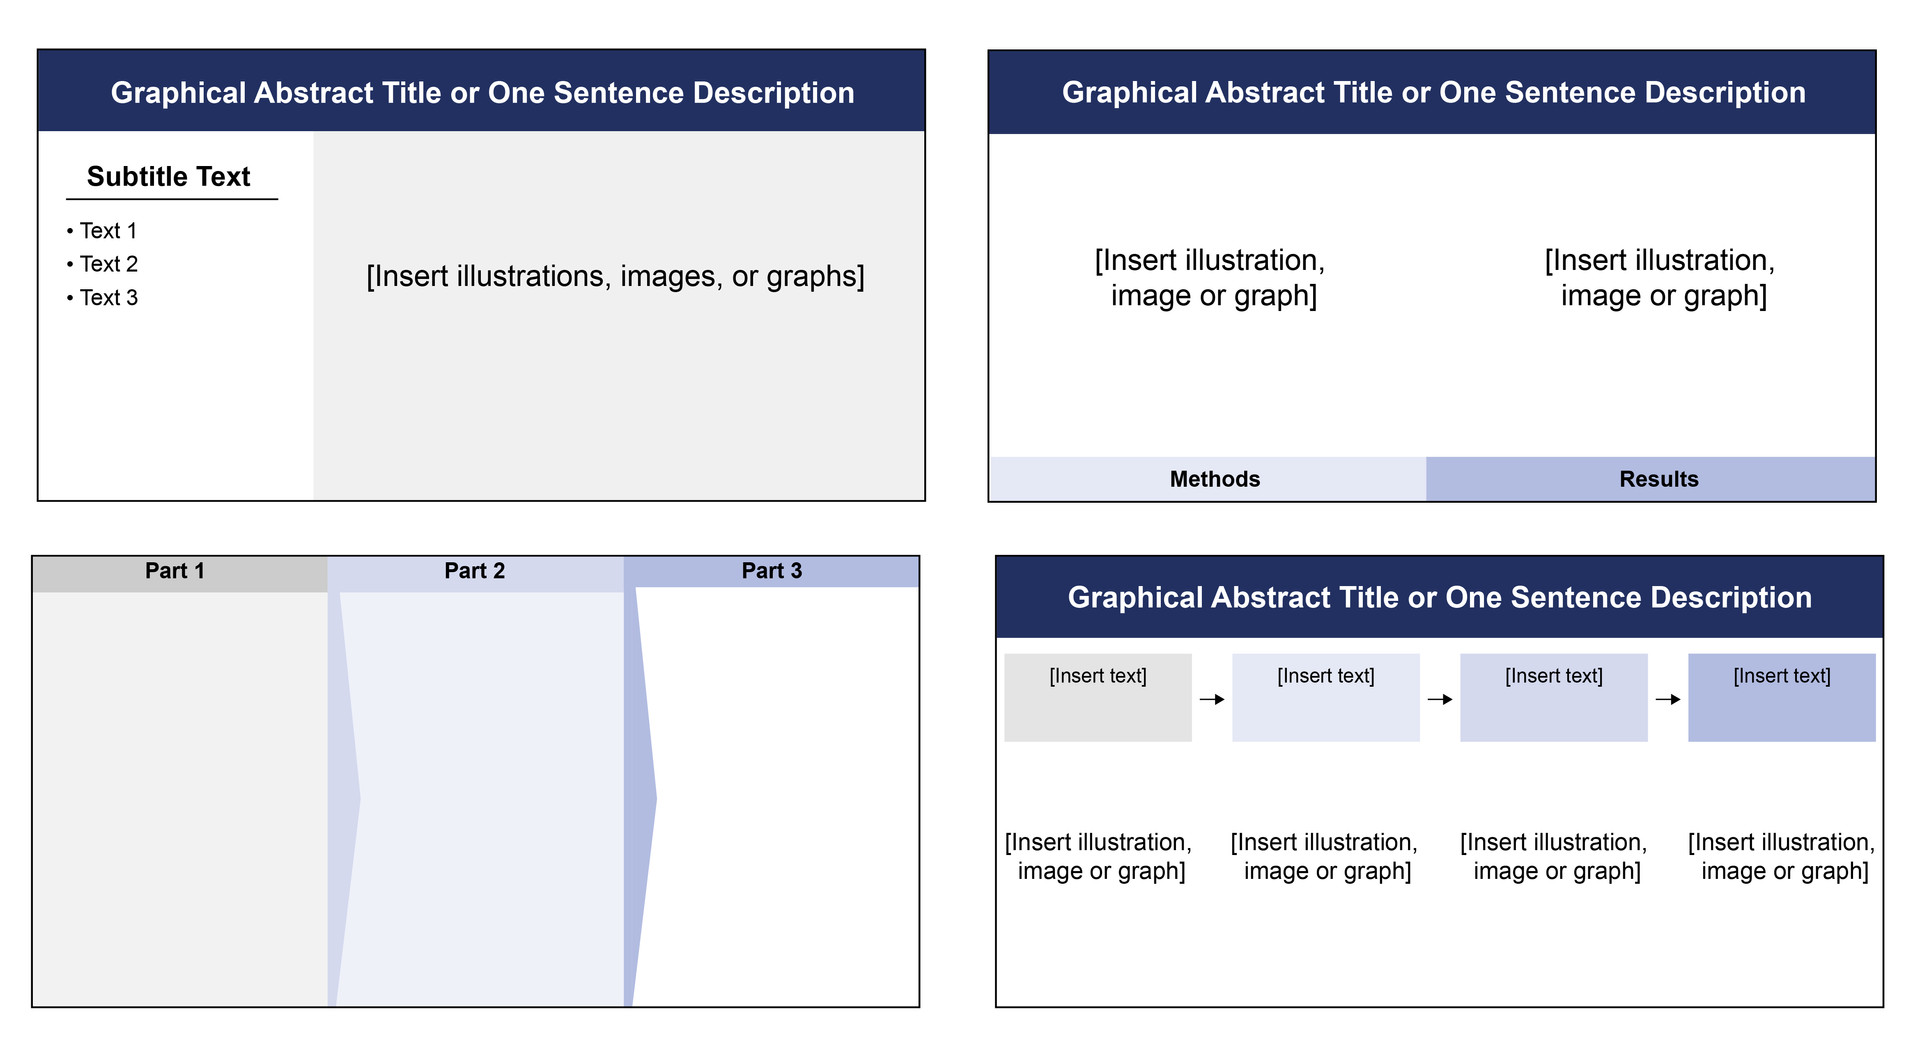 Graphical abstract examples with left-to-right designs